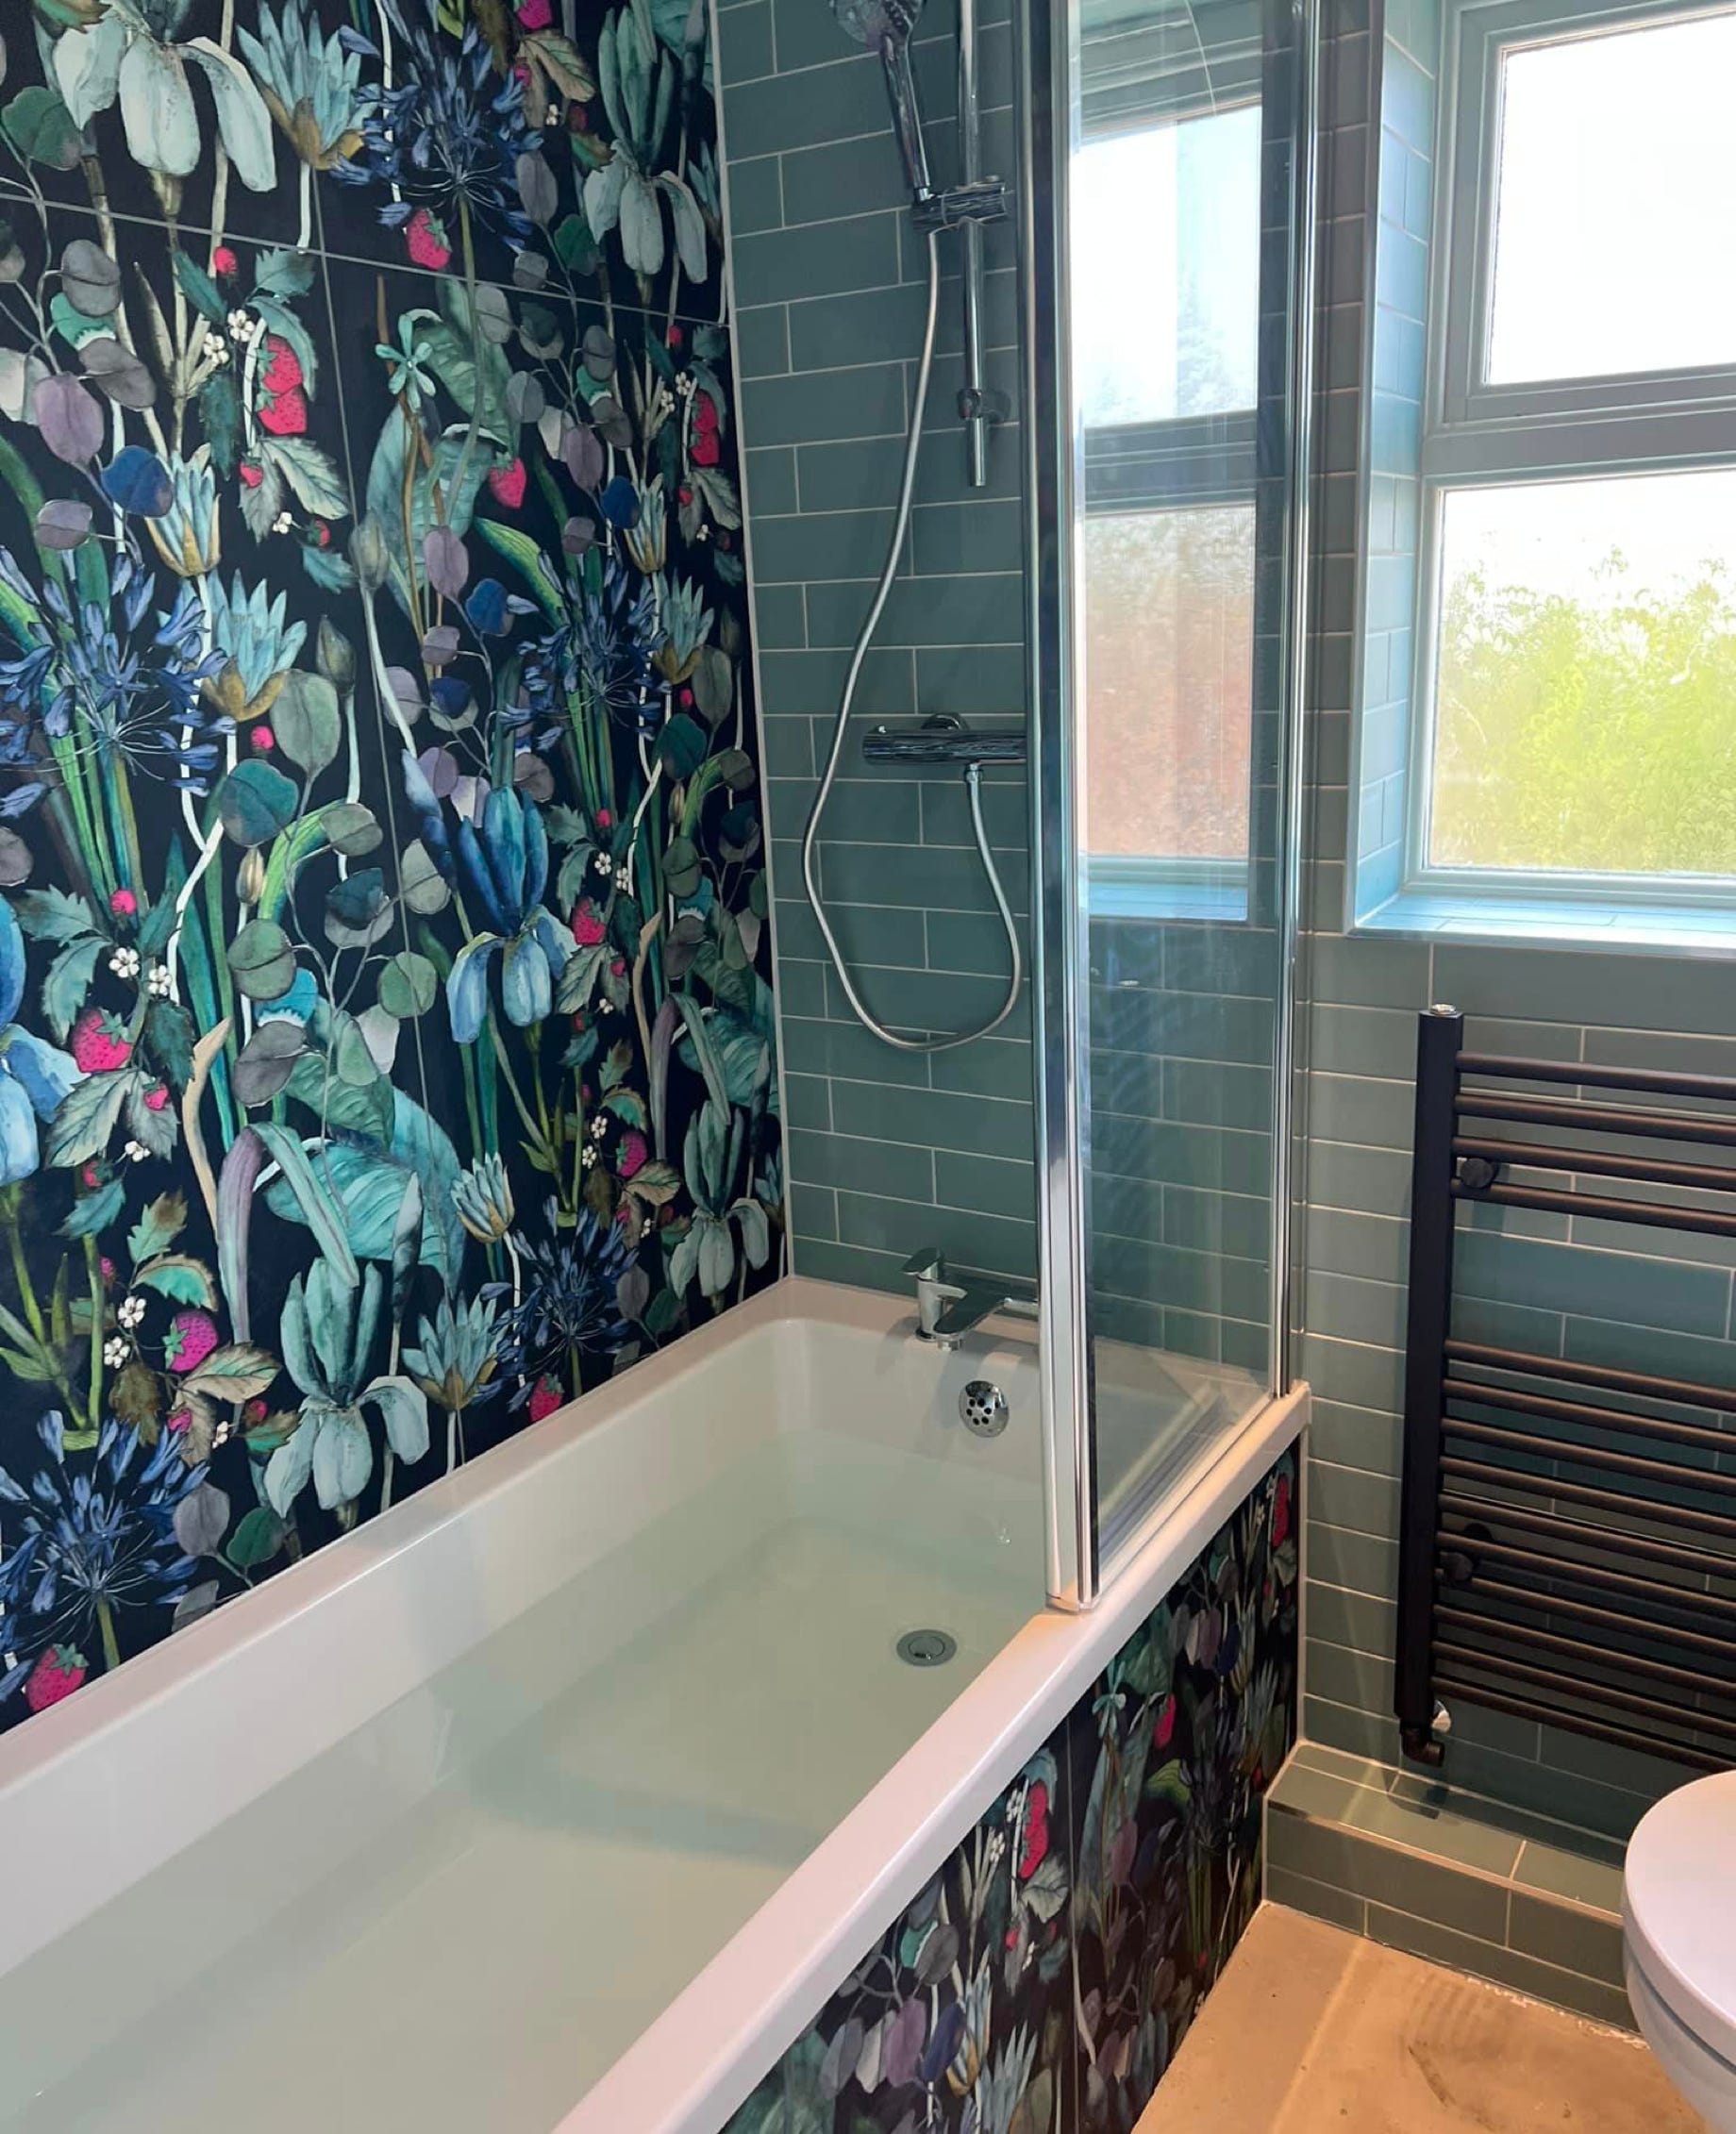 Image of bath with modern blue decorative floral tiles on the wall and bath side with an adjacent wall of plain aqua tiles with a modern fitted radiator.